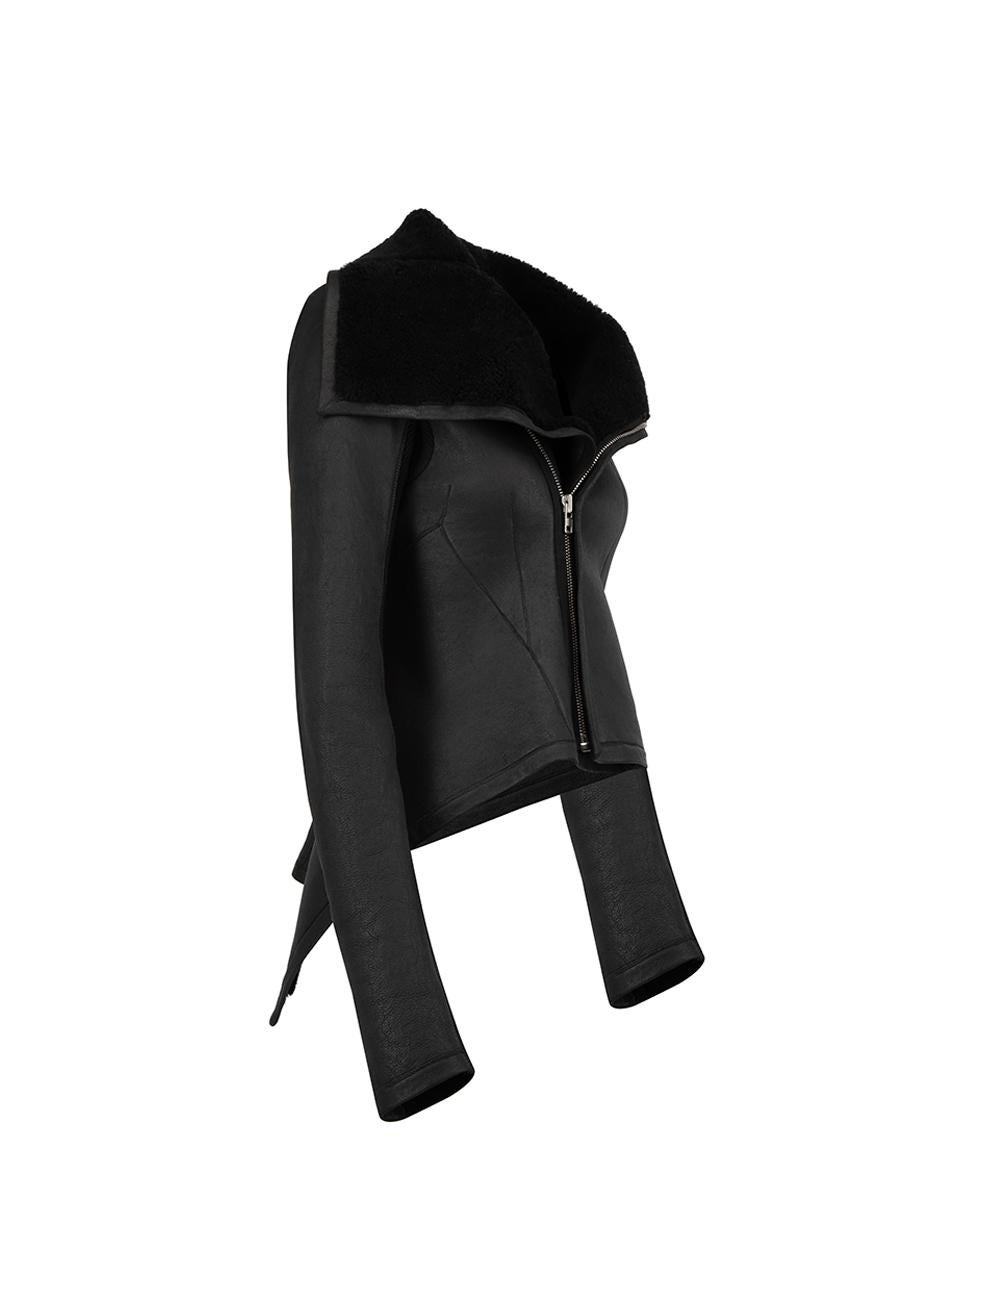 CONDITION is Very good. Hardly any visible wear is to jacket is evident on this used Rick Owens desigher resale item. Details Black Leather Cropped biker jacket Ribbed knit panelled Front asymmetric zip closure Shearling lined Made in Moldova